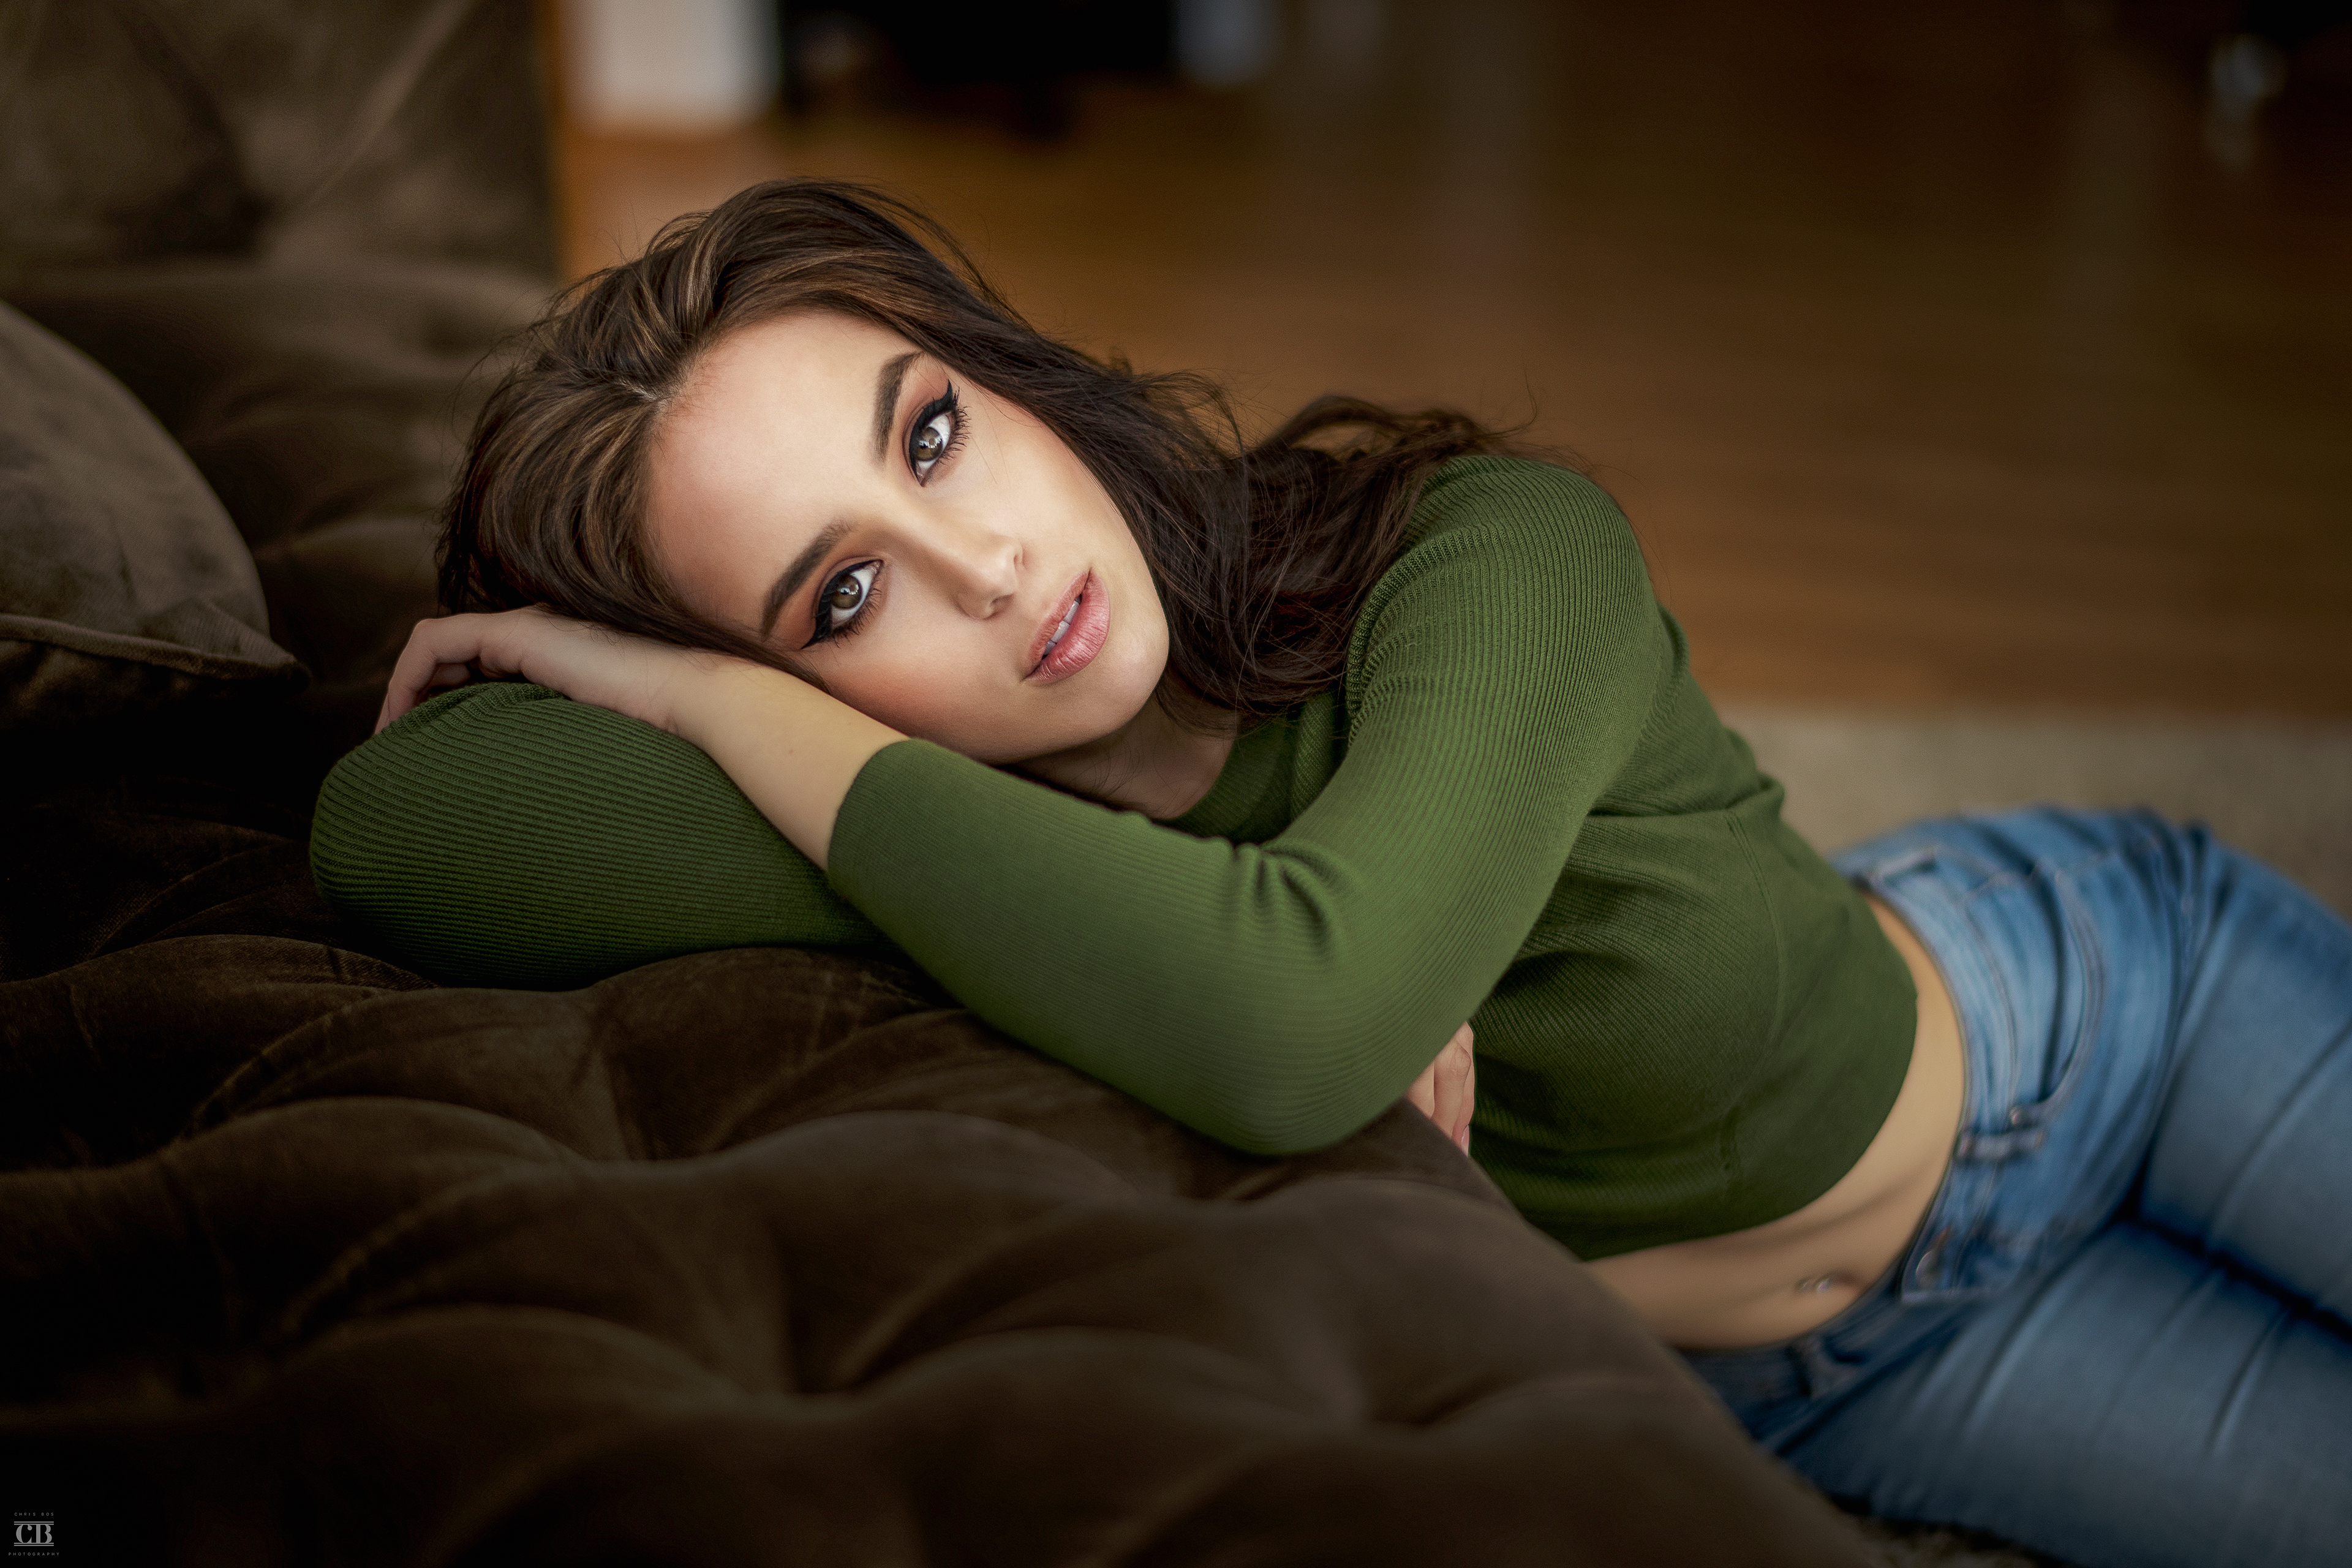 Anna Bous Women Brunette Model Long Hair Looking At Viewer Crop Top Green Top Sweater Jeans On The F 3840x2560